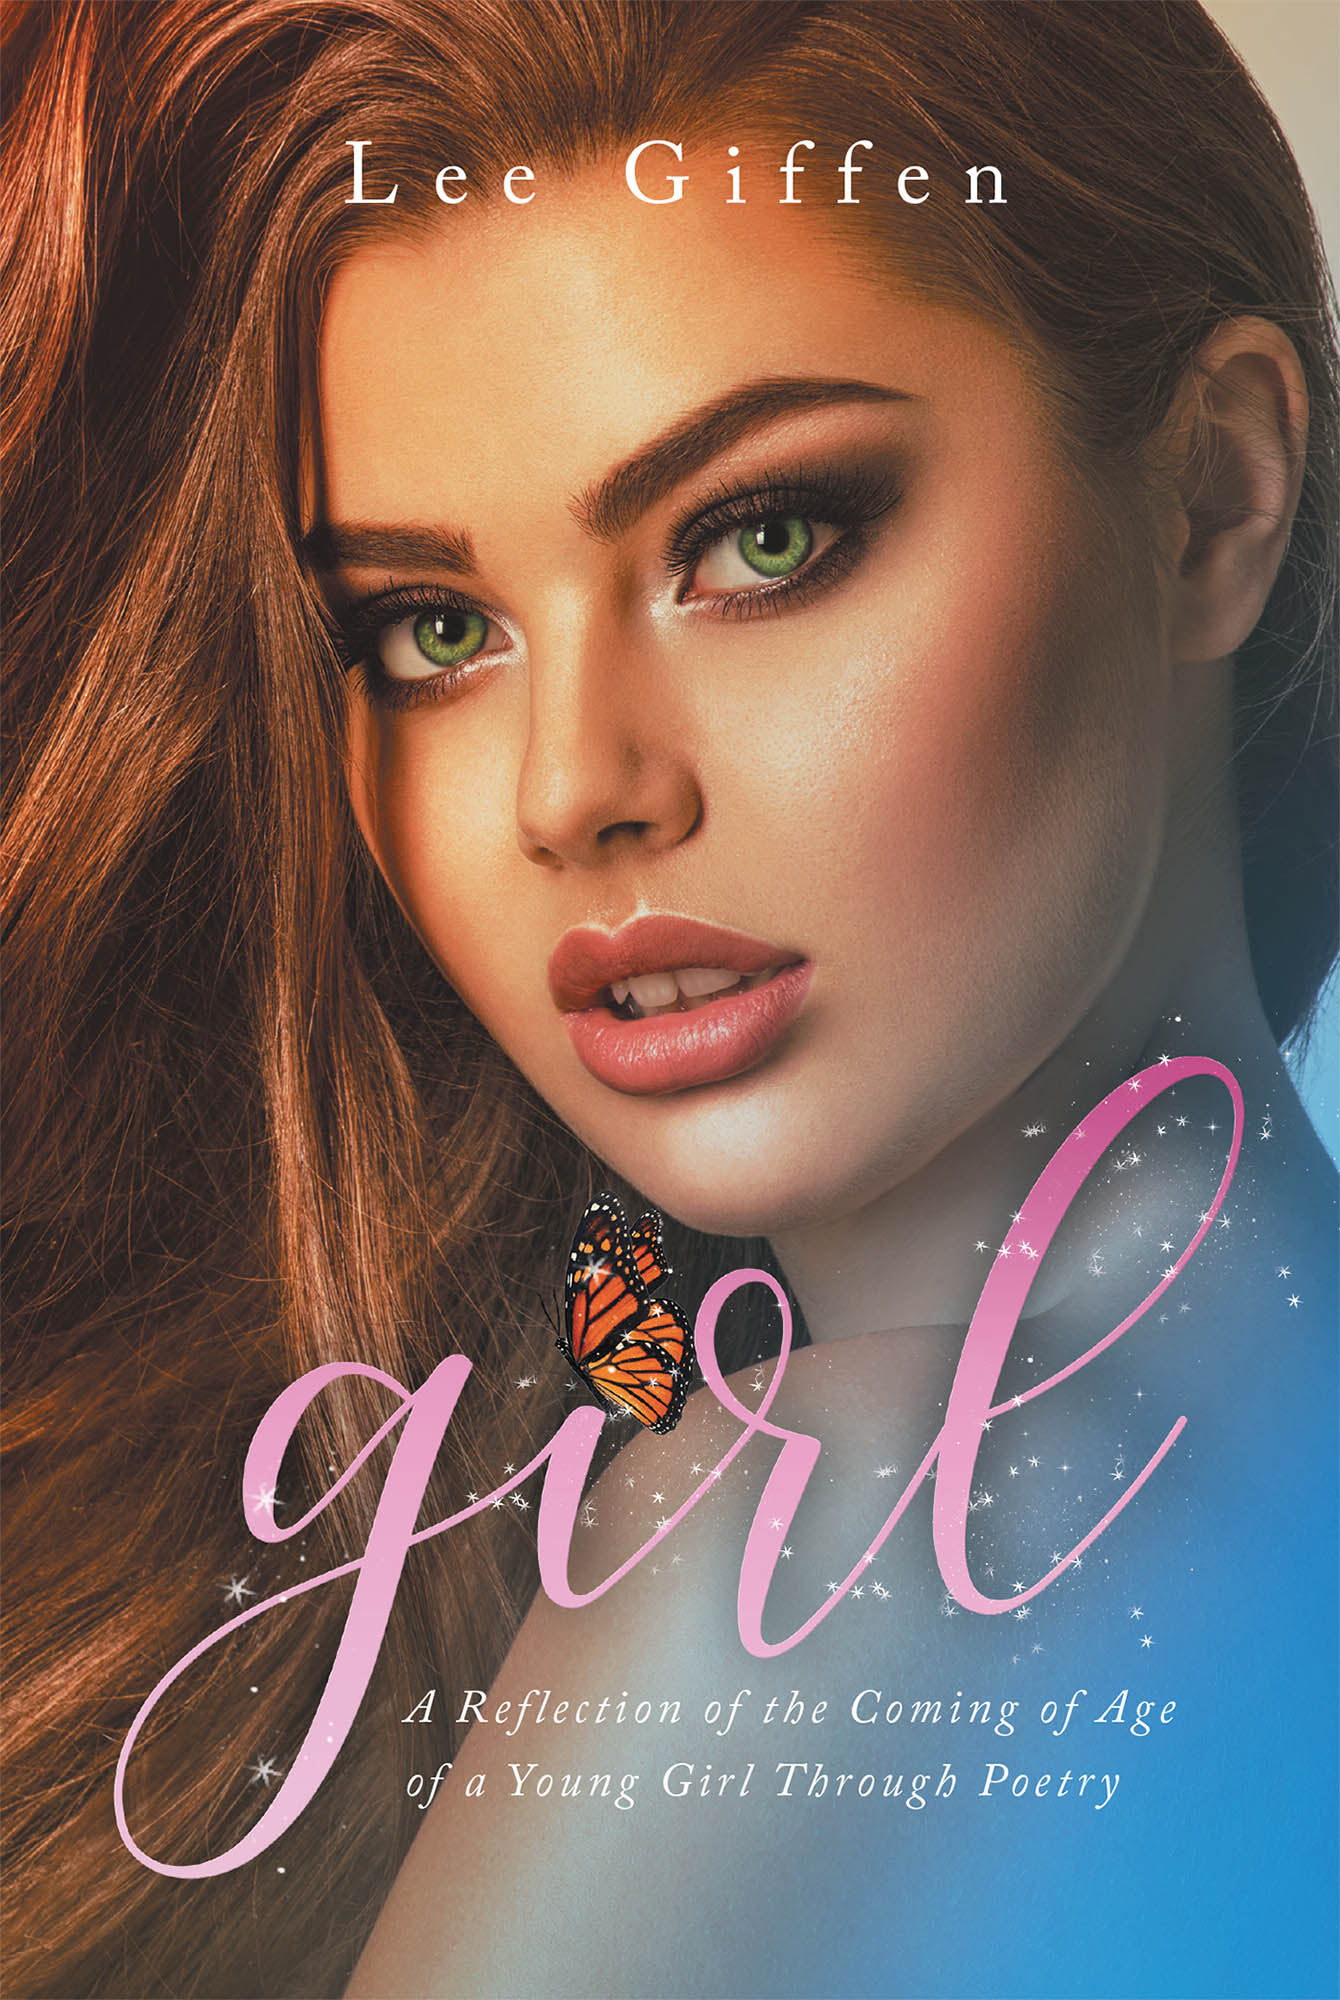 Lee Giffen’s New Book ‘Girl’ Captures the Lovely Journey Towards the Adulthood of a Young Heart